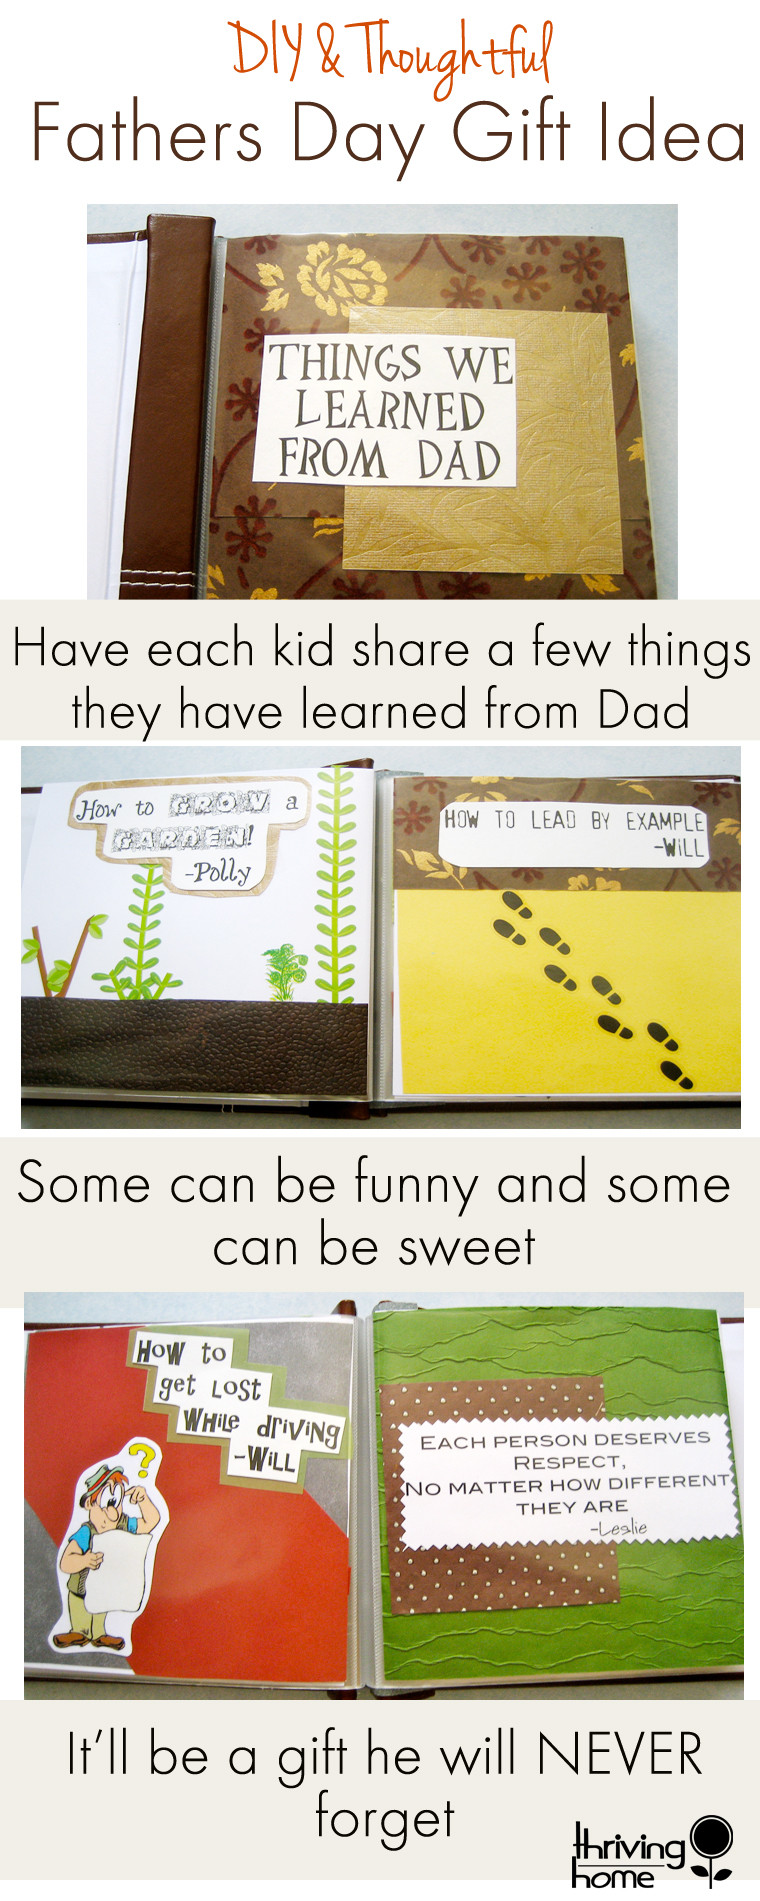 Thoughtful Fathers Day Gift Ideas
 Thoughtful Father’s Day Gift Idea